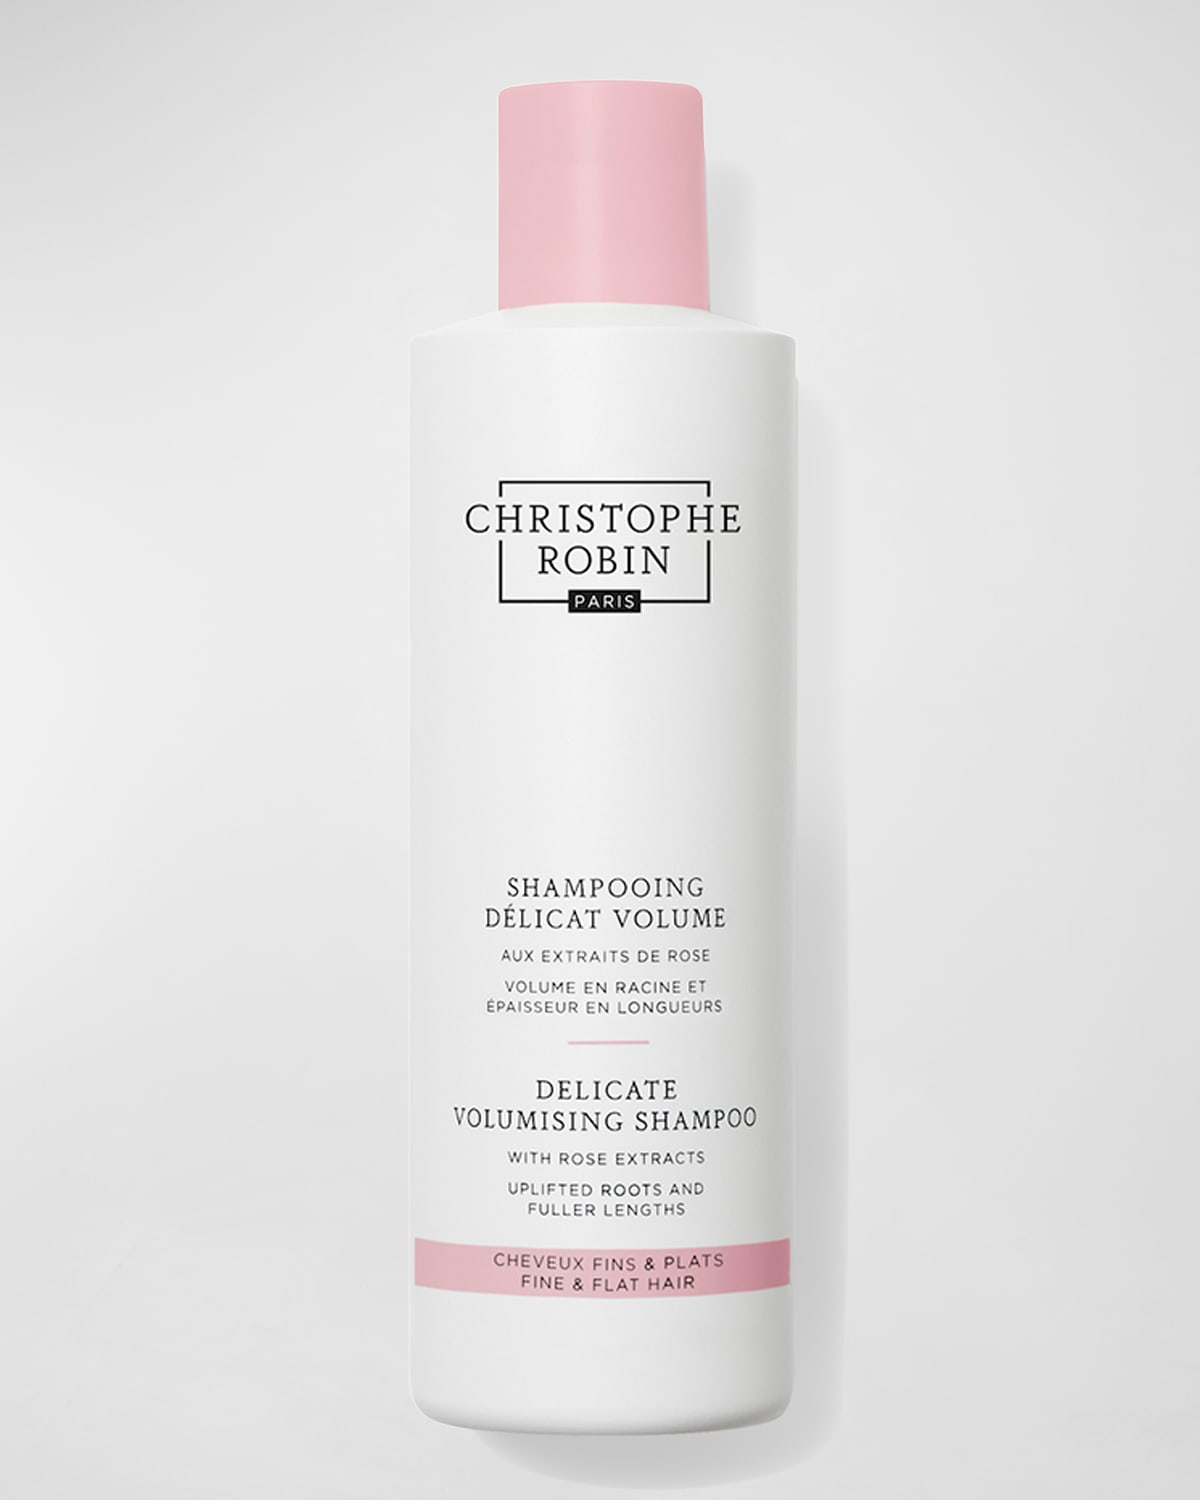 Christophe Robin Delicate Volumizing Shampoo with Rose Extracts, 8.4 oz./ 250 mL